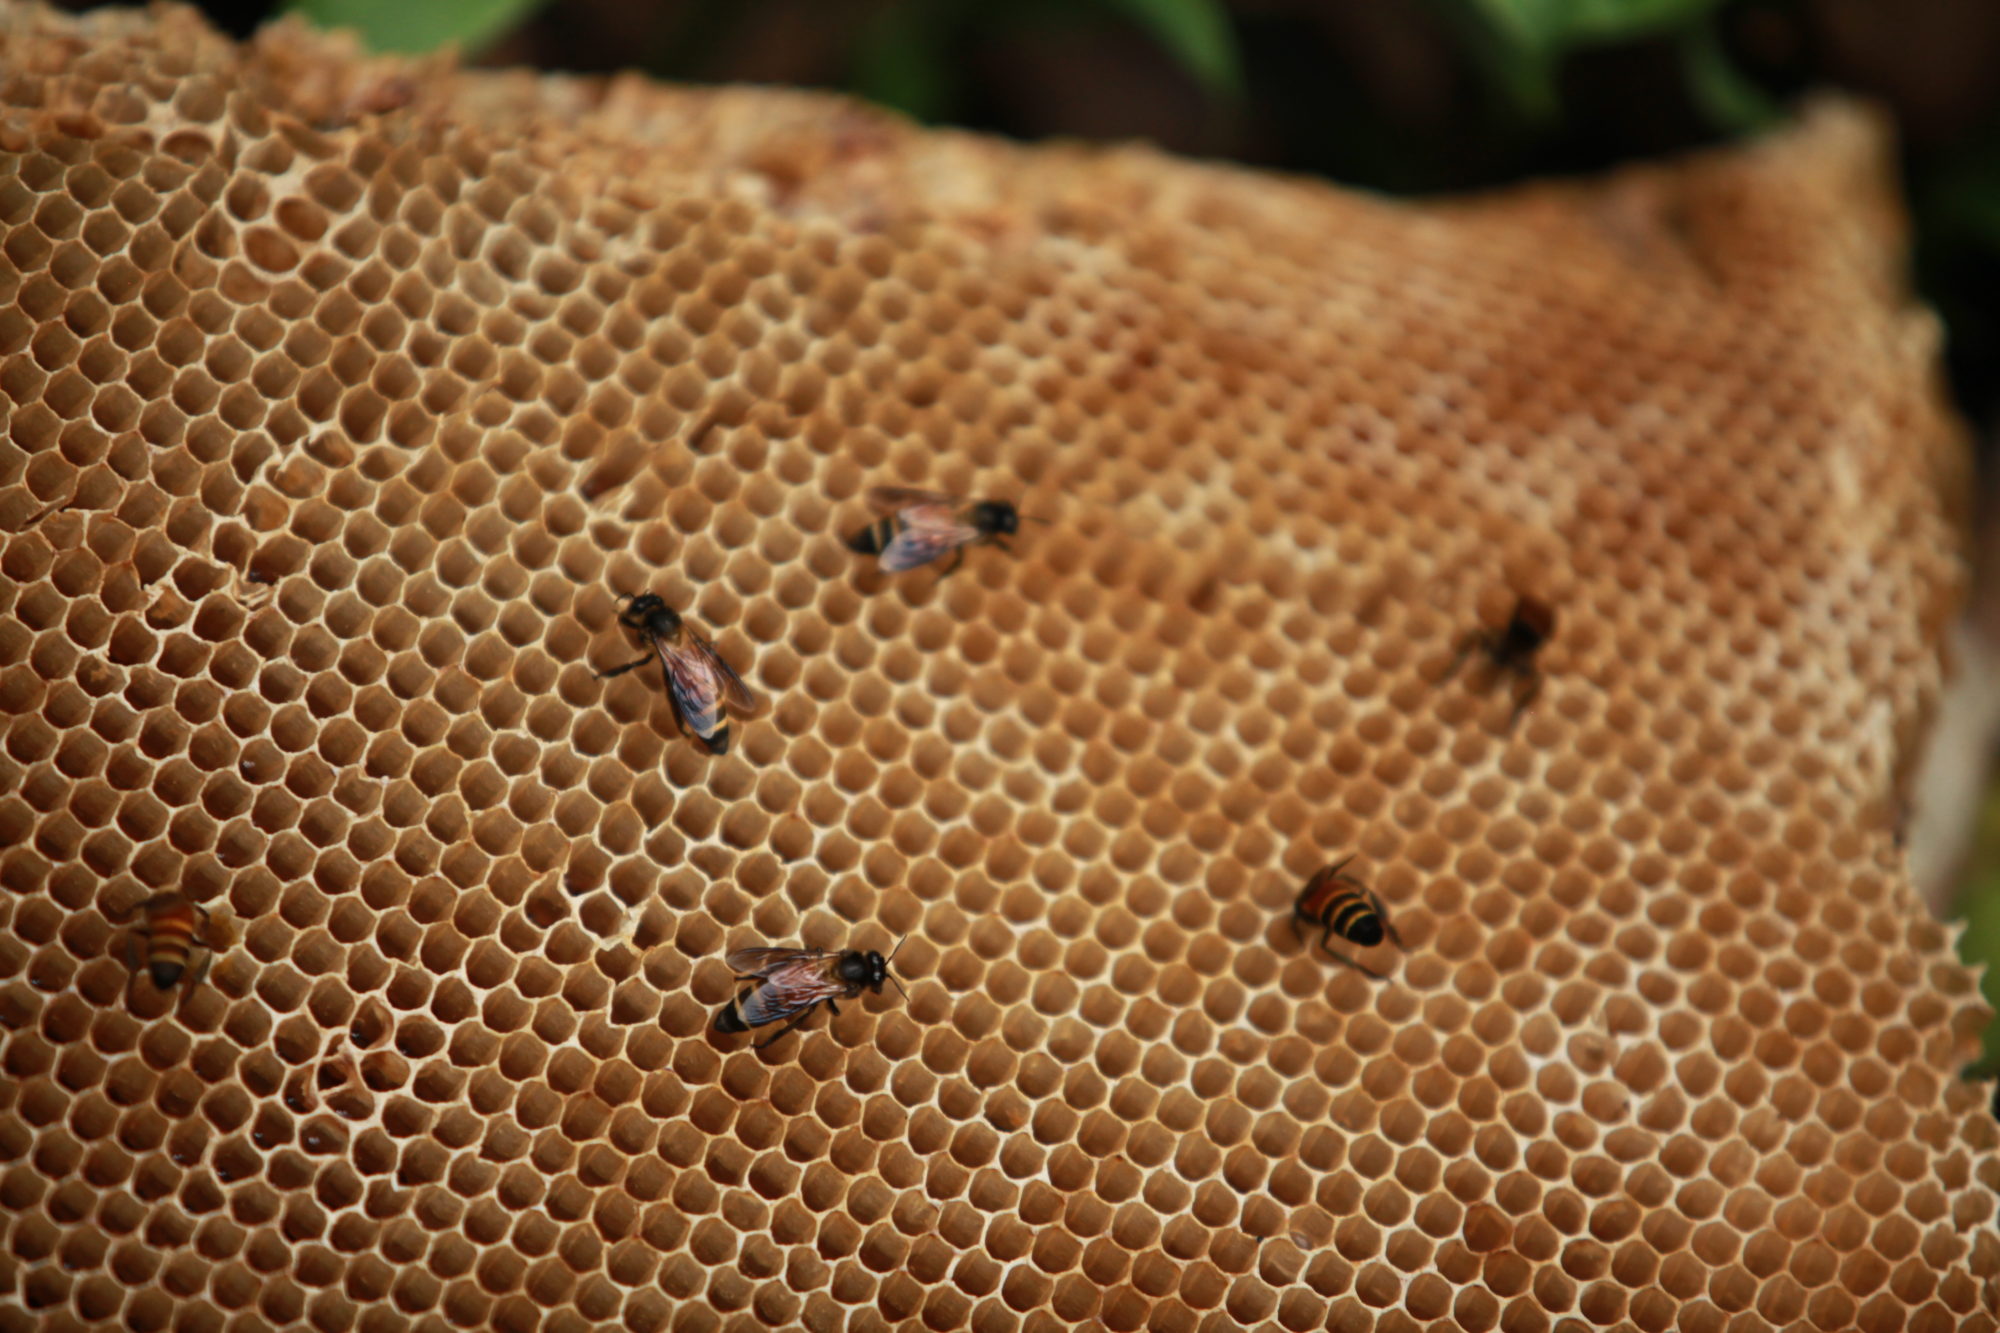 six bees interspersed on a honeycomb